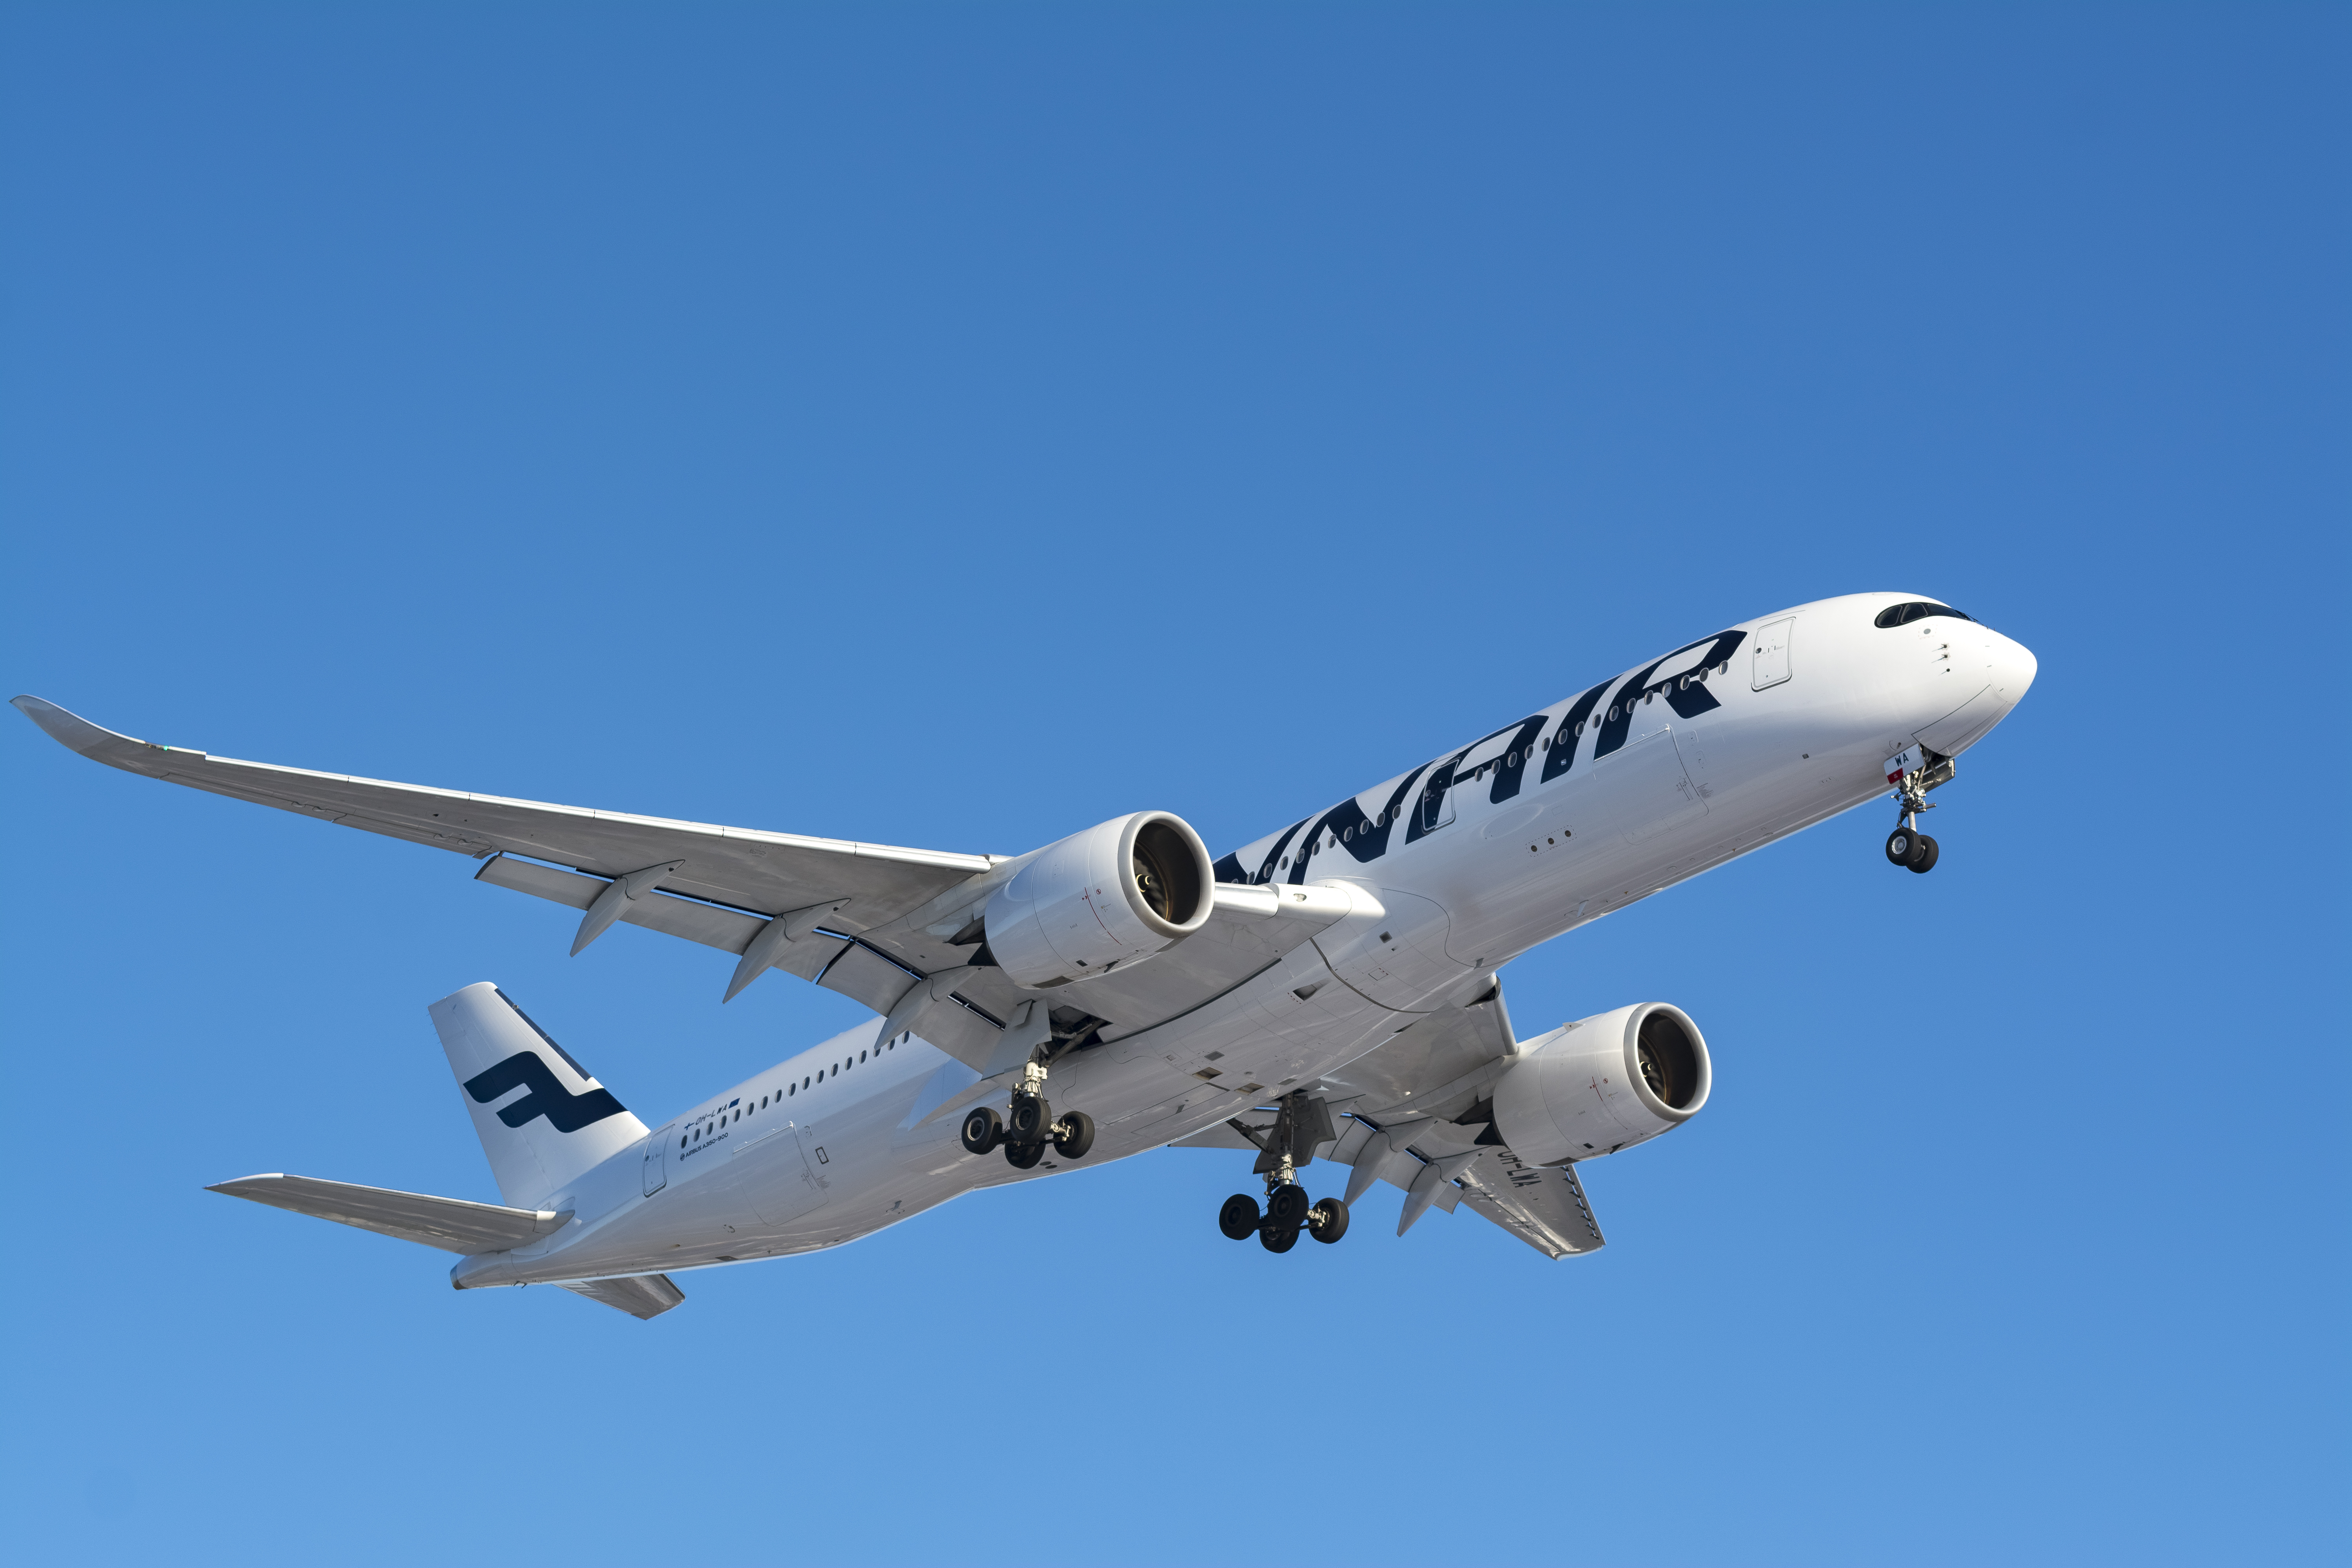 A Finnair Airlines Airbus A350 landing at Helsinki-Vantaa Airport in Finland on, March 11, 2017. (Getty)